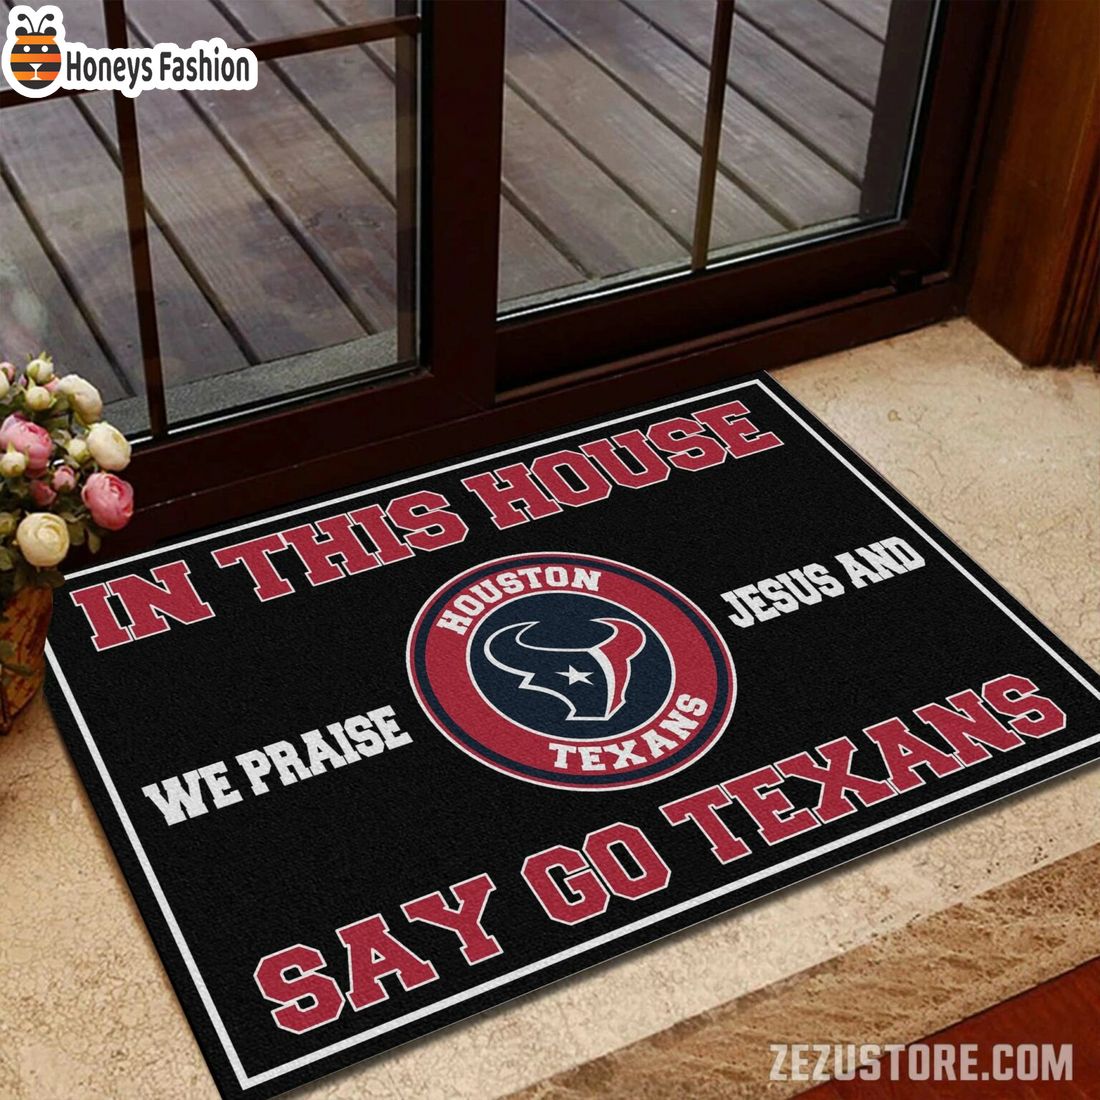 In this house we praise jesus and say go Texans doormat